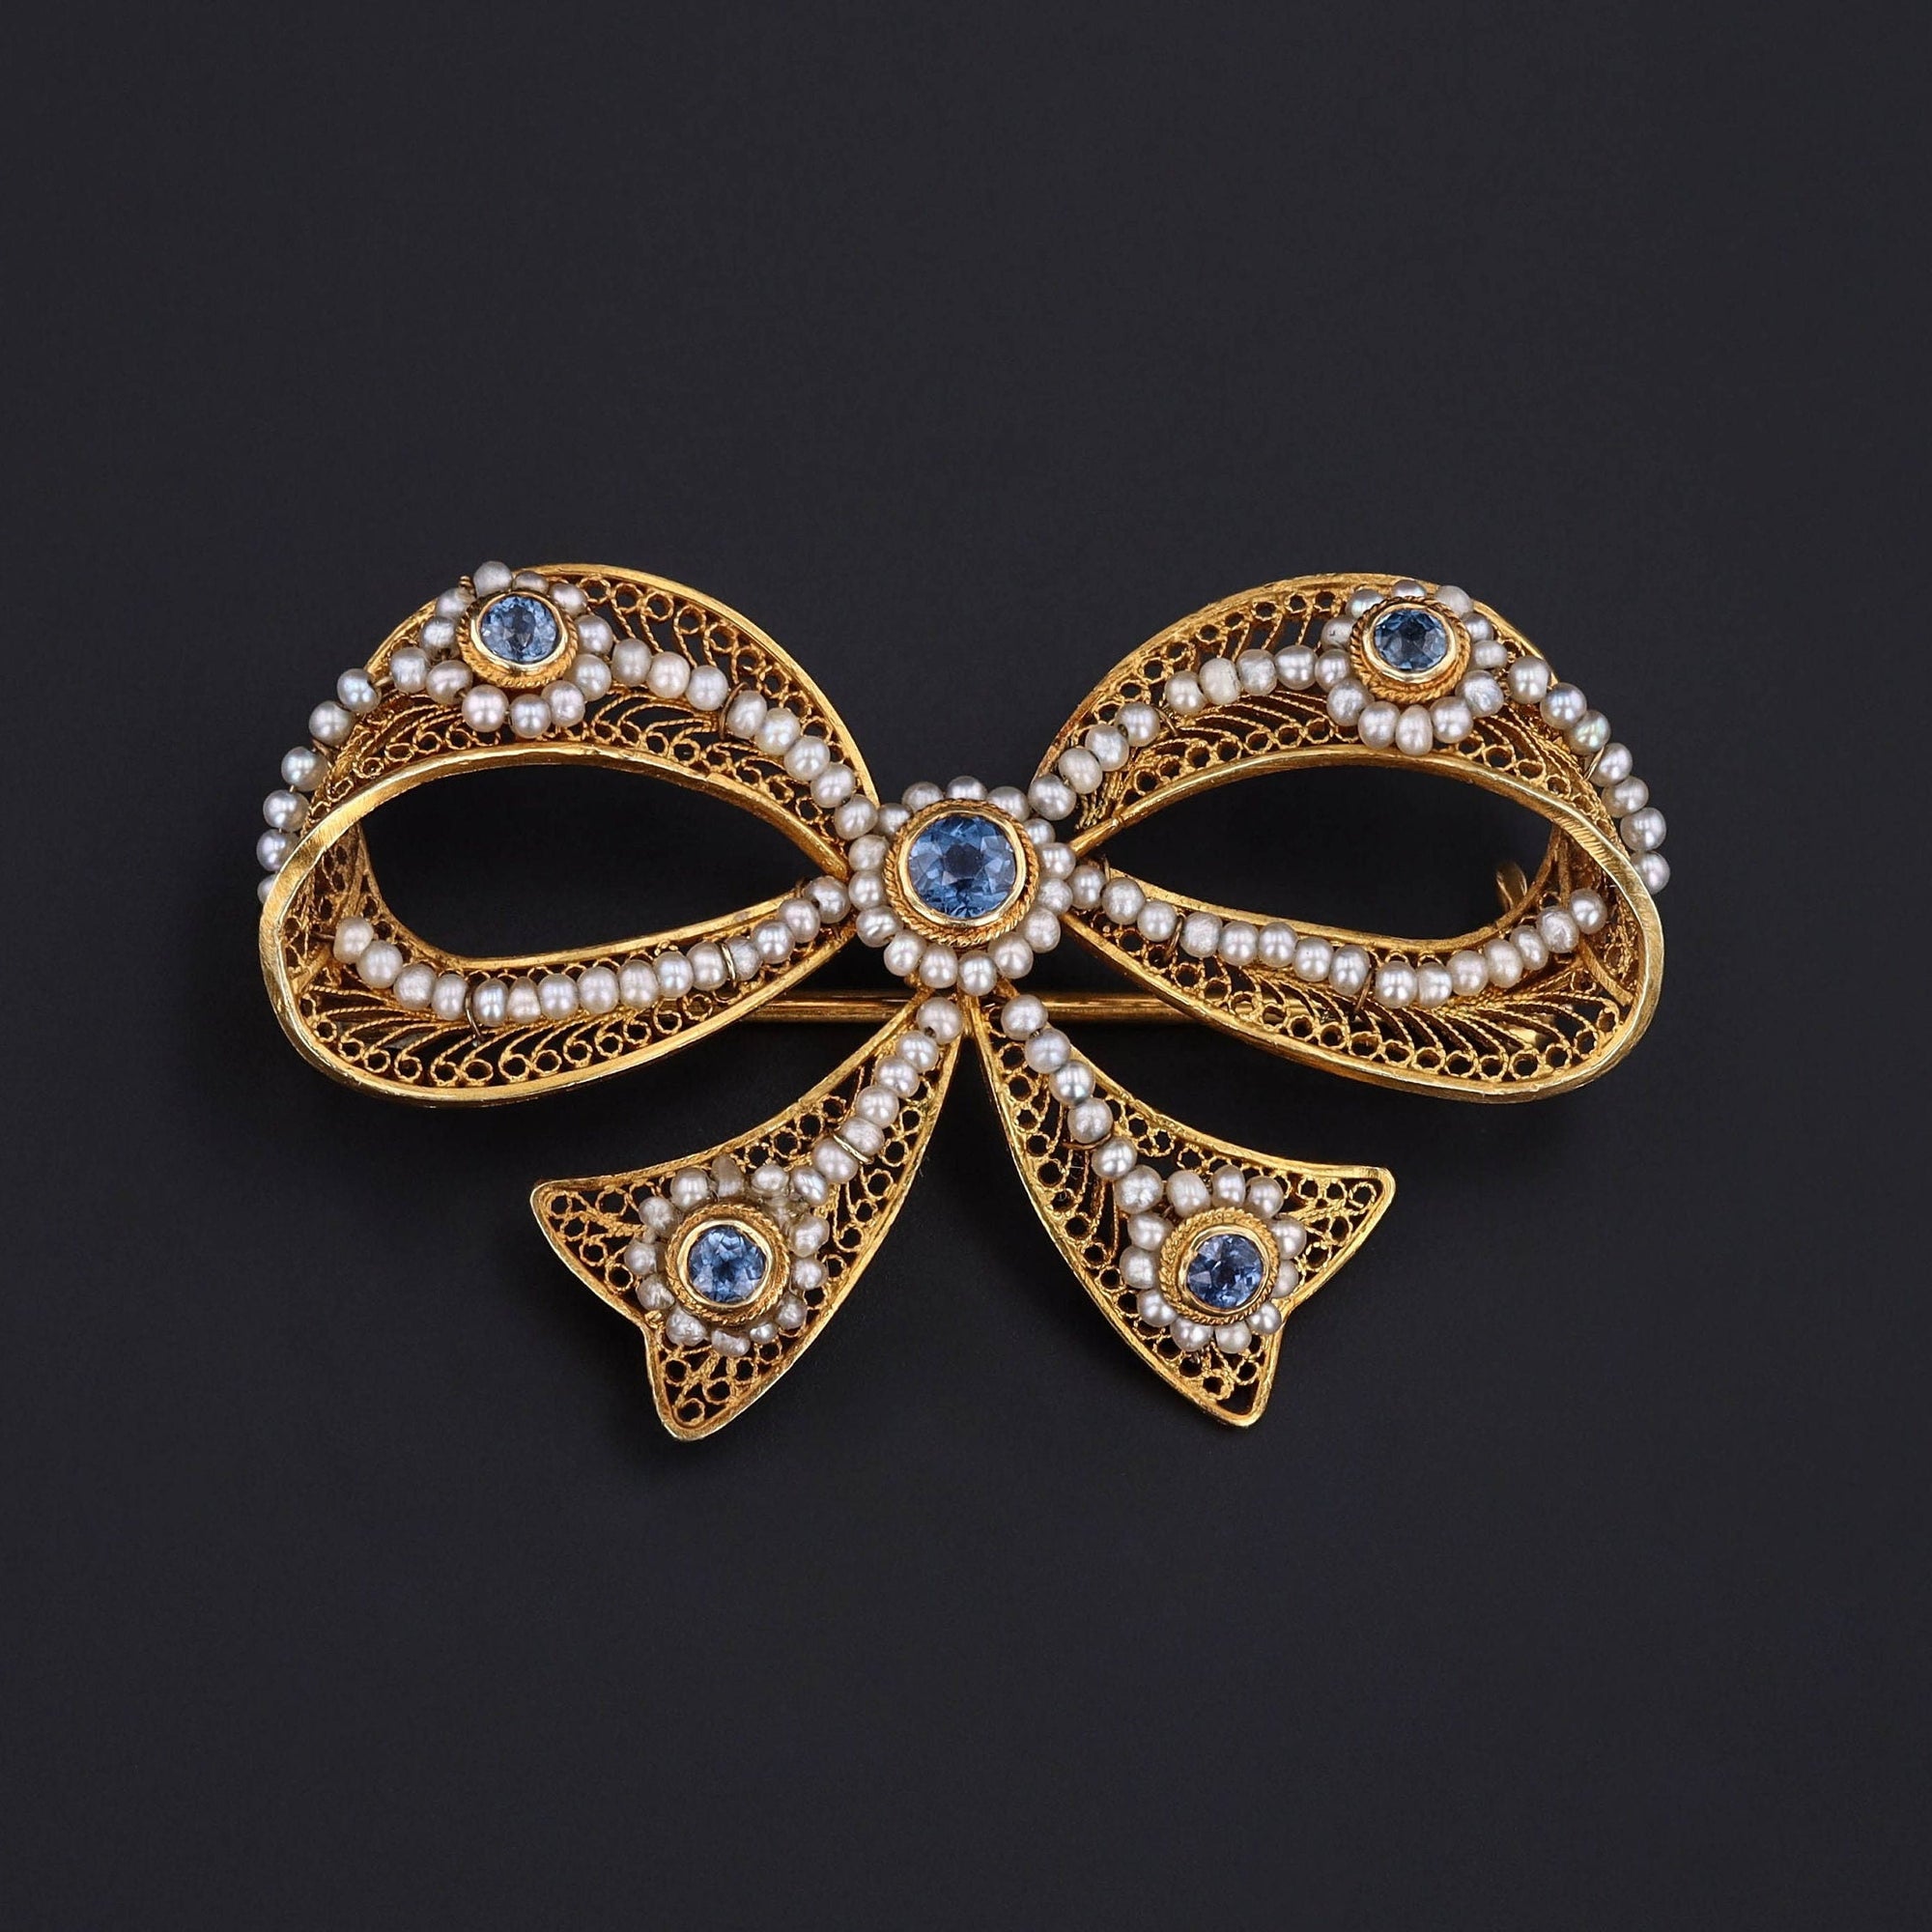 Antique Pearl and Sapphire Bow Brooch of 14k Gold